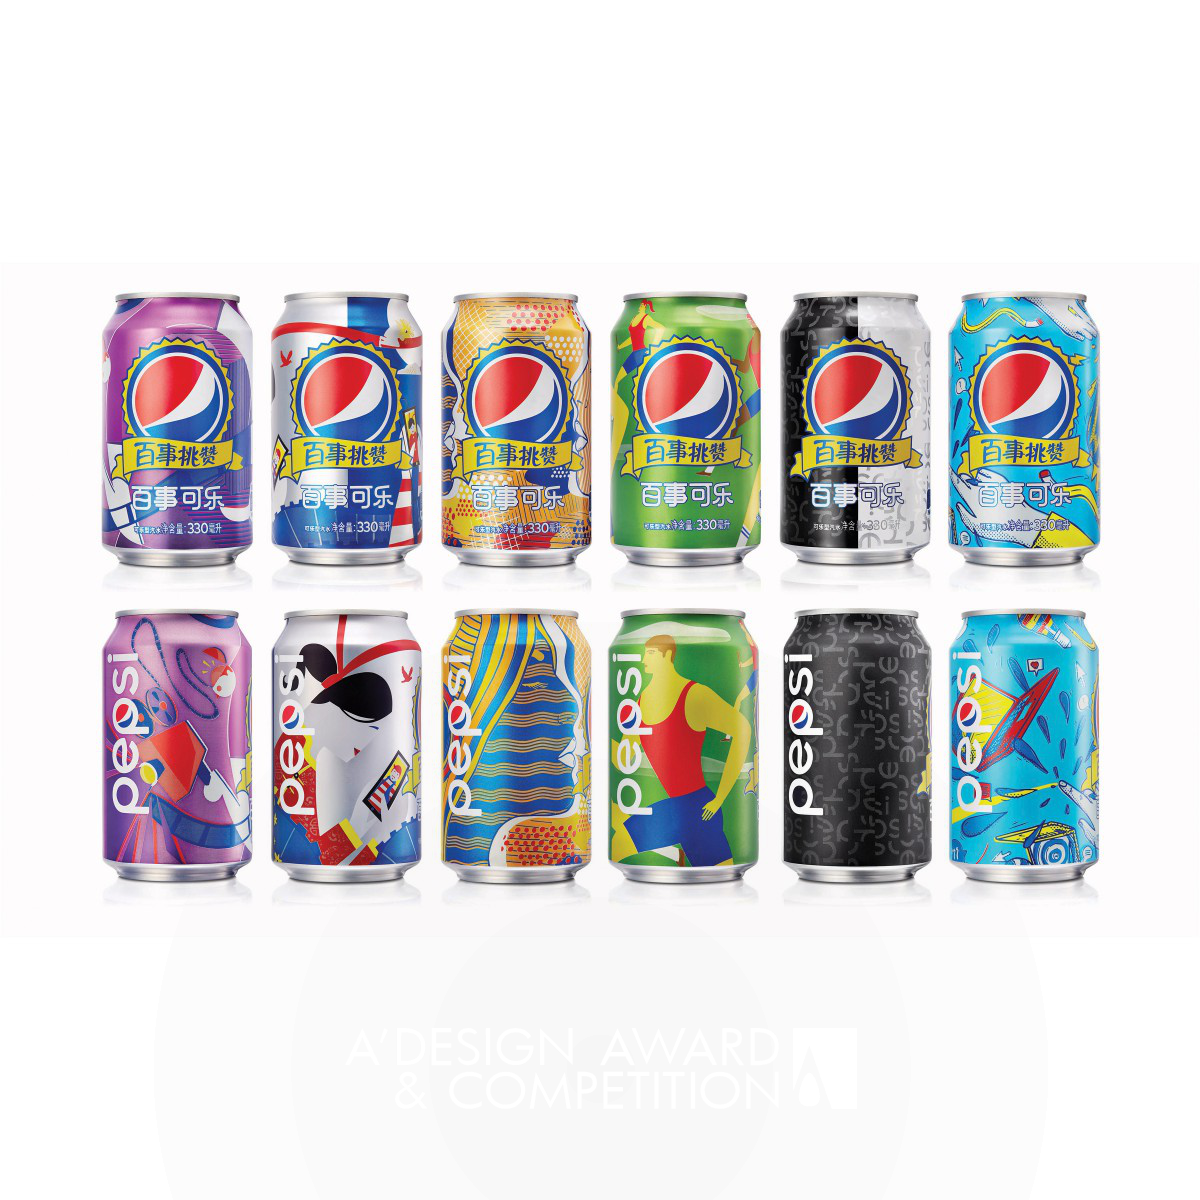 Pepsi Challenge China Aluminum Can by PepsiCo Design & Innovation